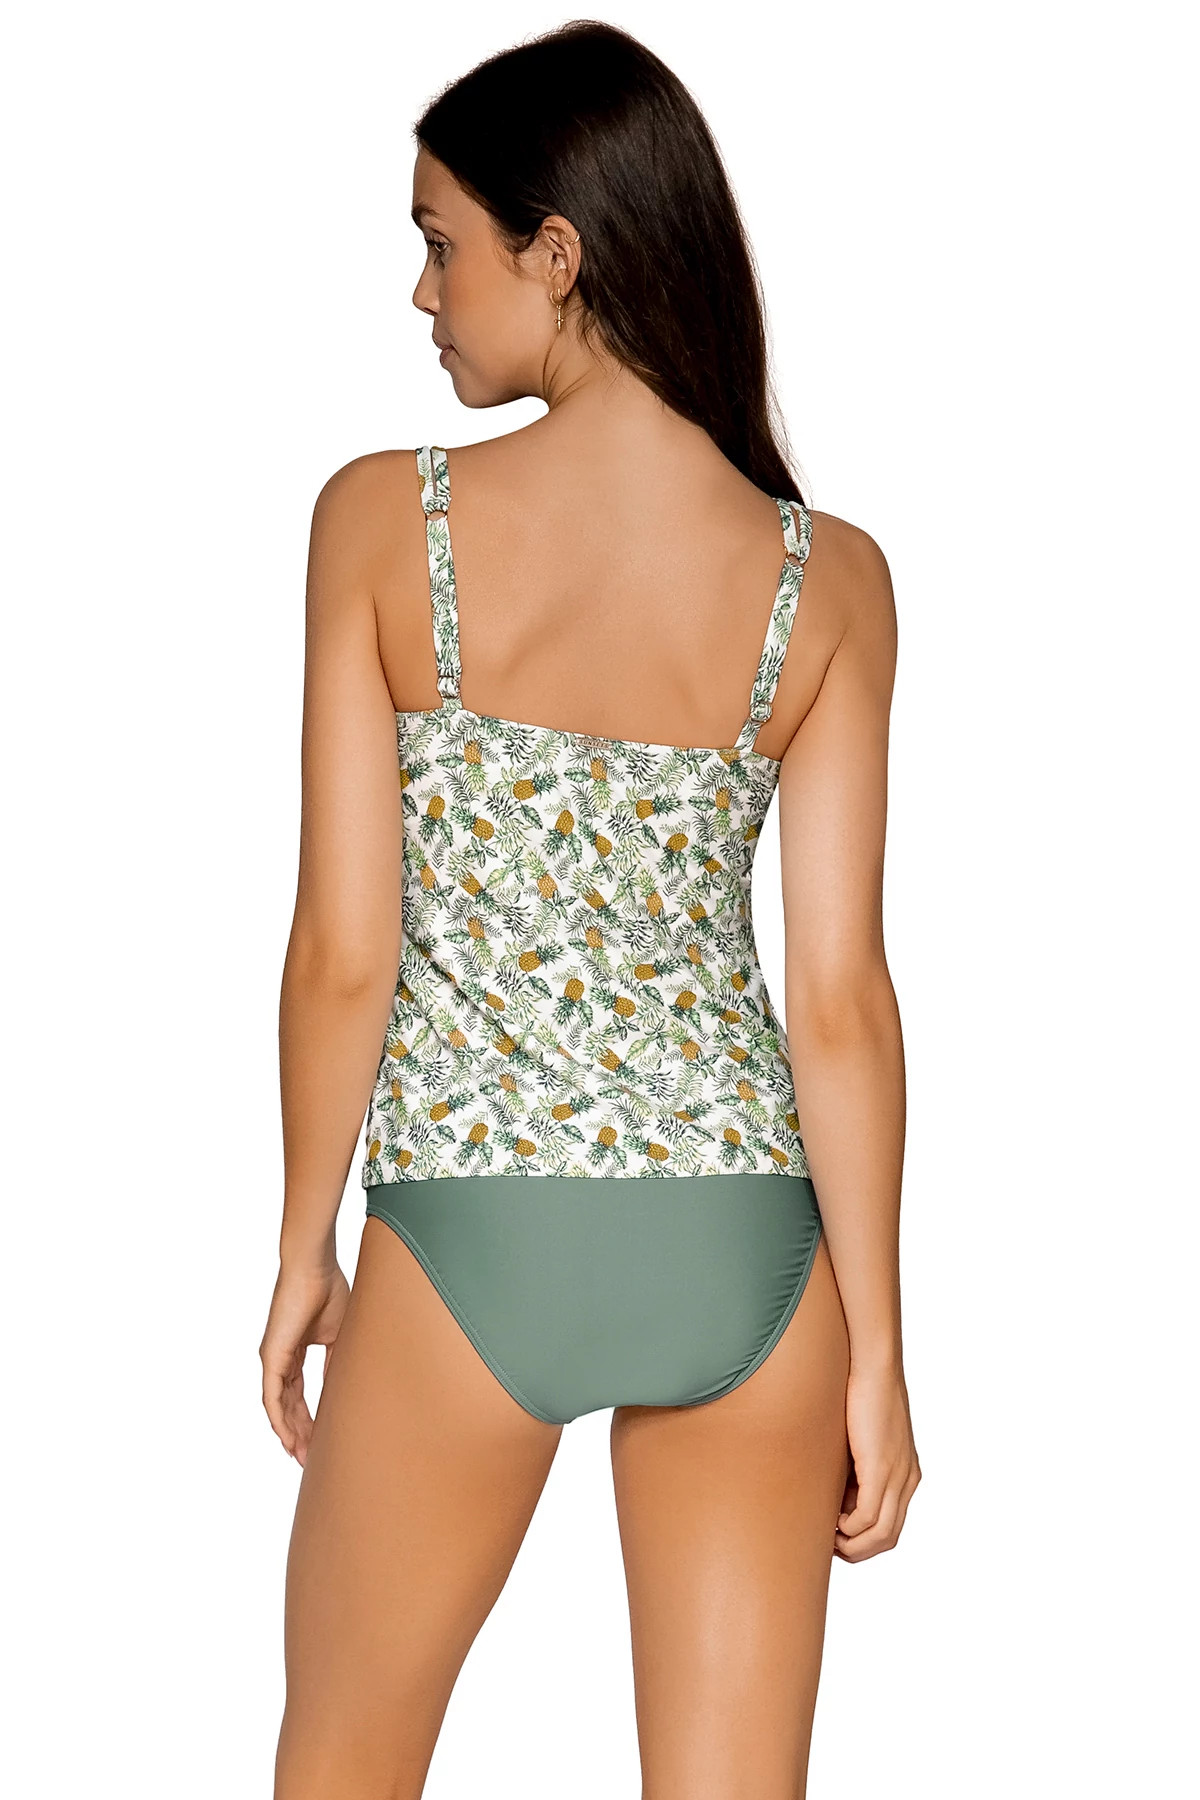 MONTEGO Taylor Underwire Bra Tankini Top (E-H Cup) image number 2